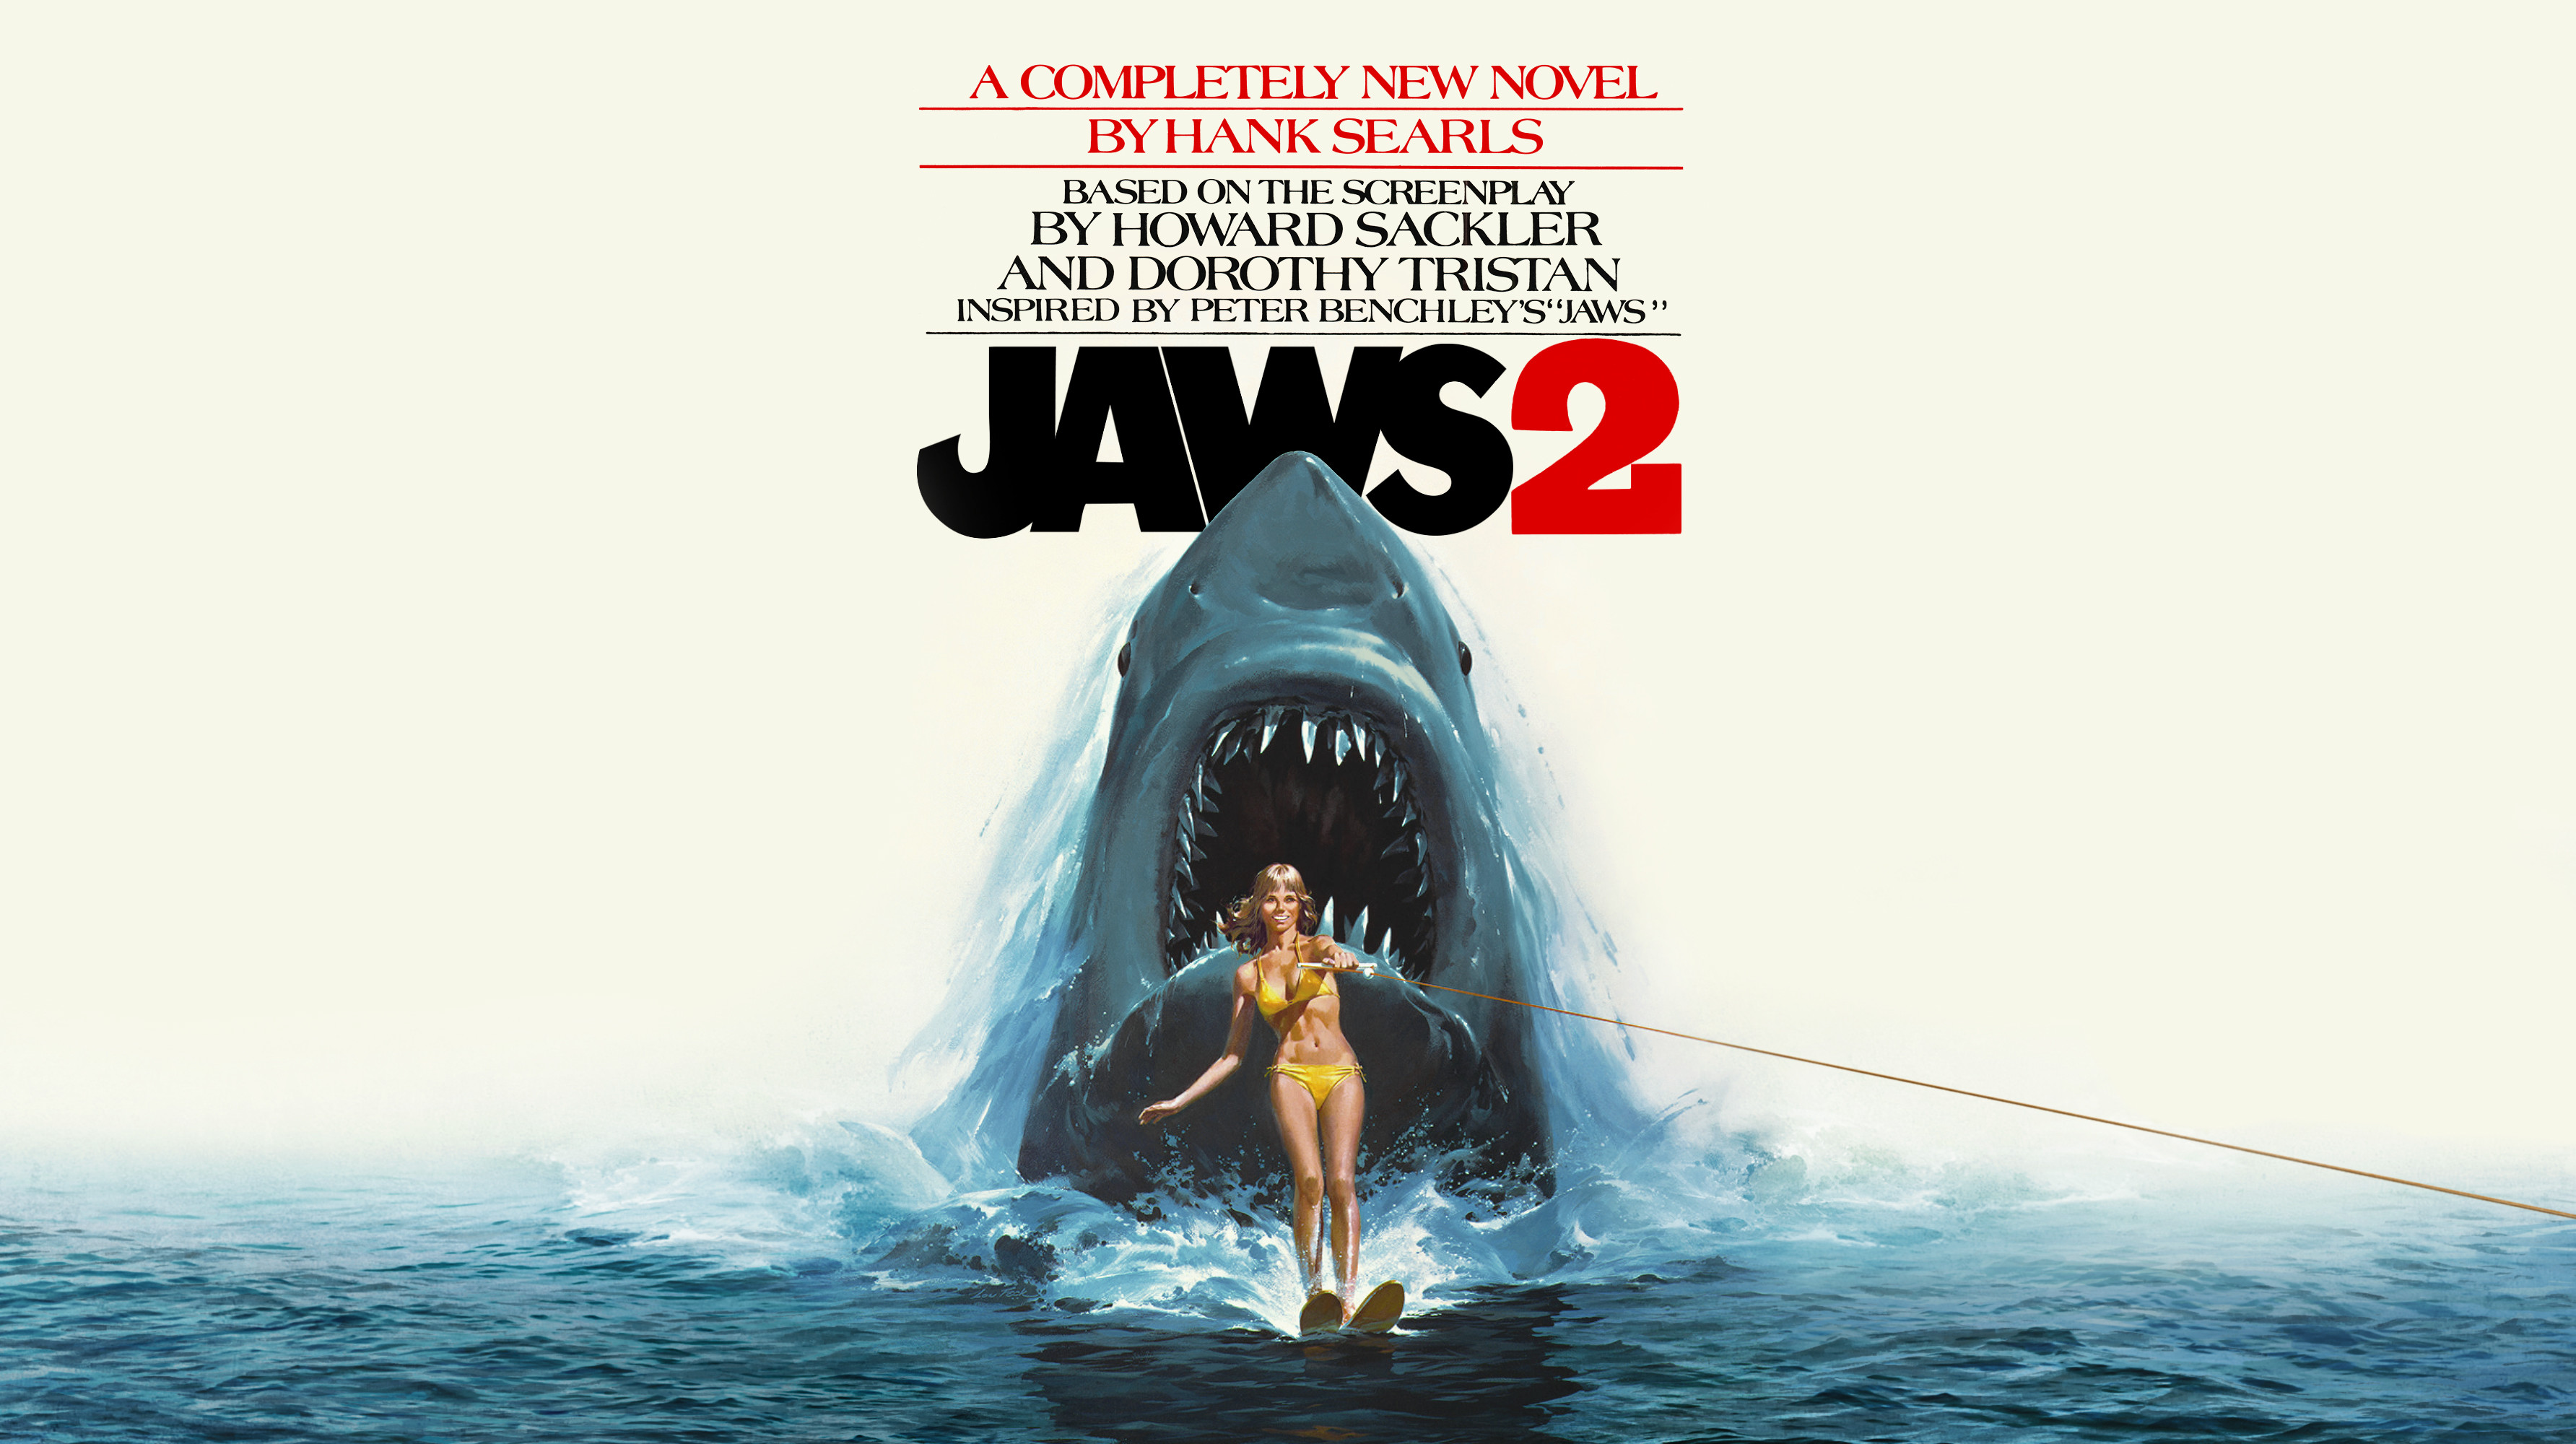 3568x2000 Jaws images JAWS 2 NOVELIZATION WALLPAPER HD wallpaper and background photos